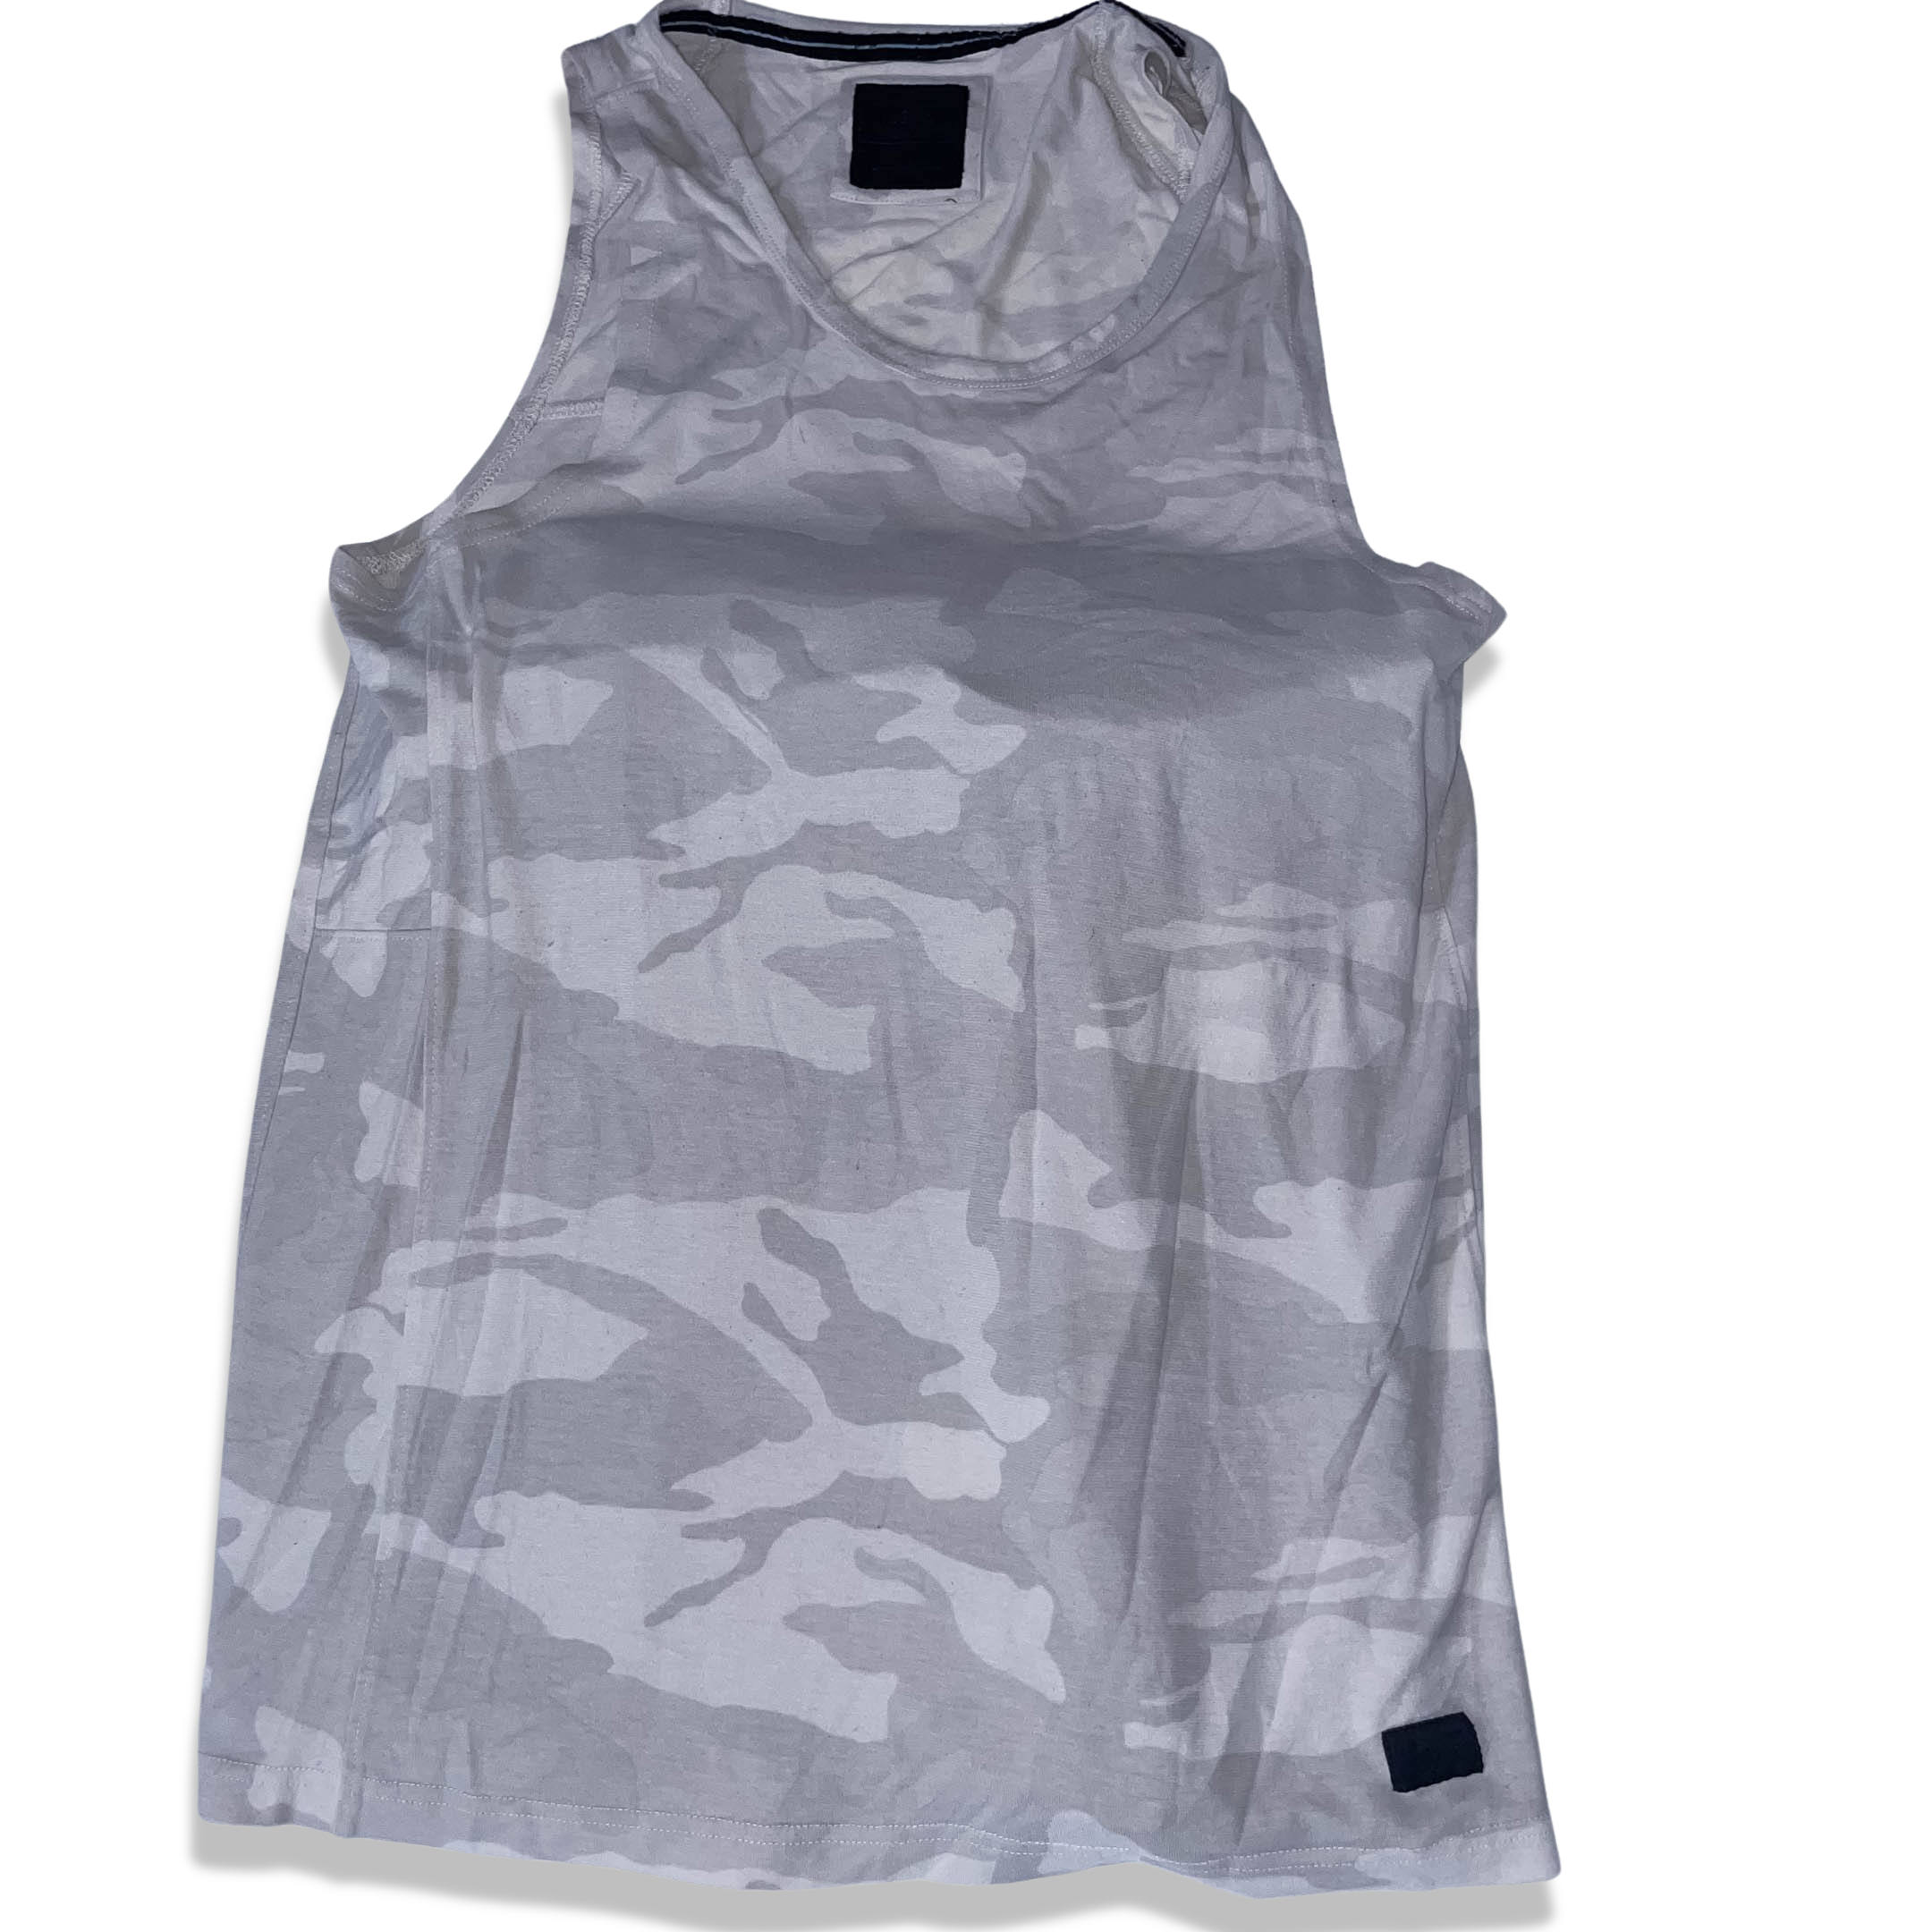 Vintage Abercrombie & Fitch grey white Camo mens small tank top